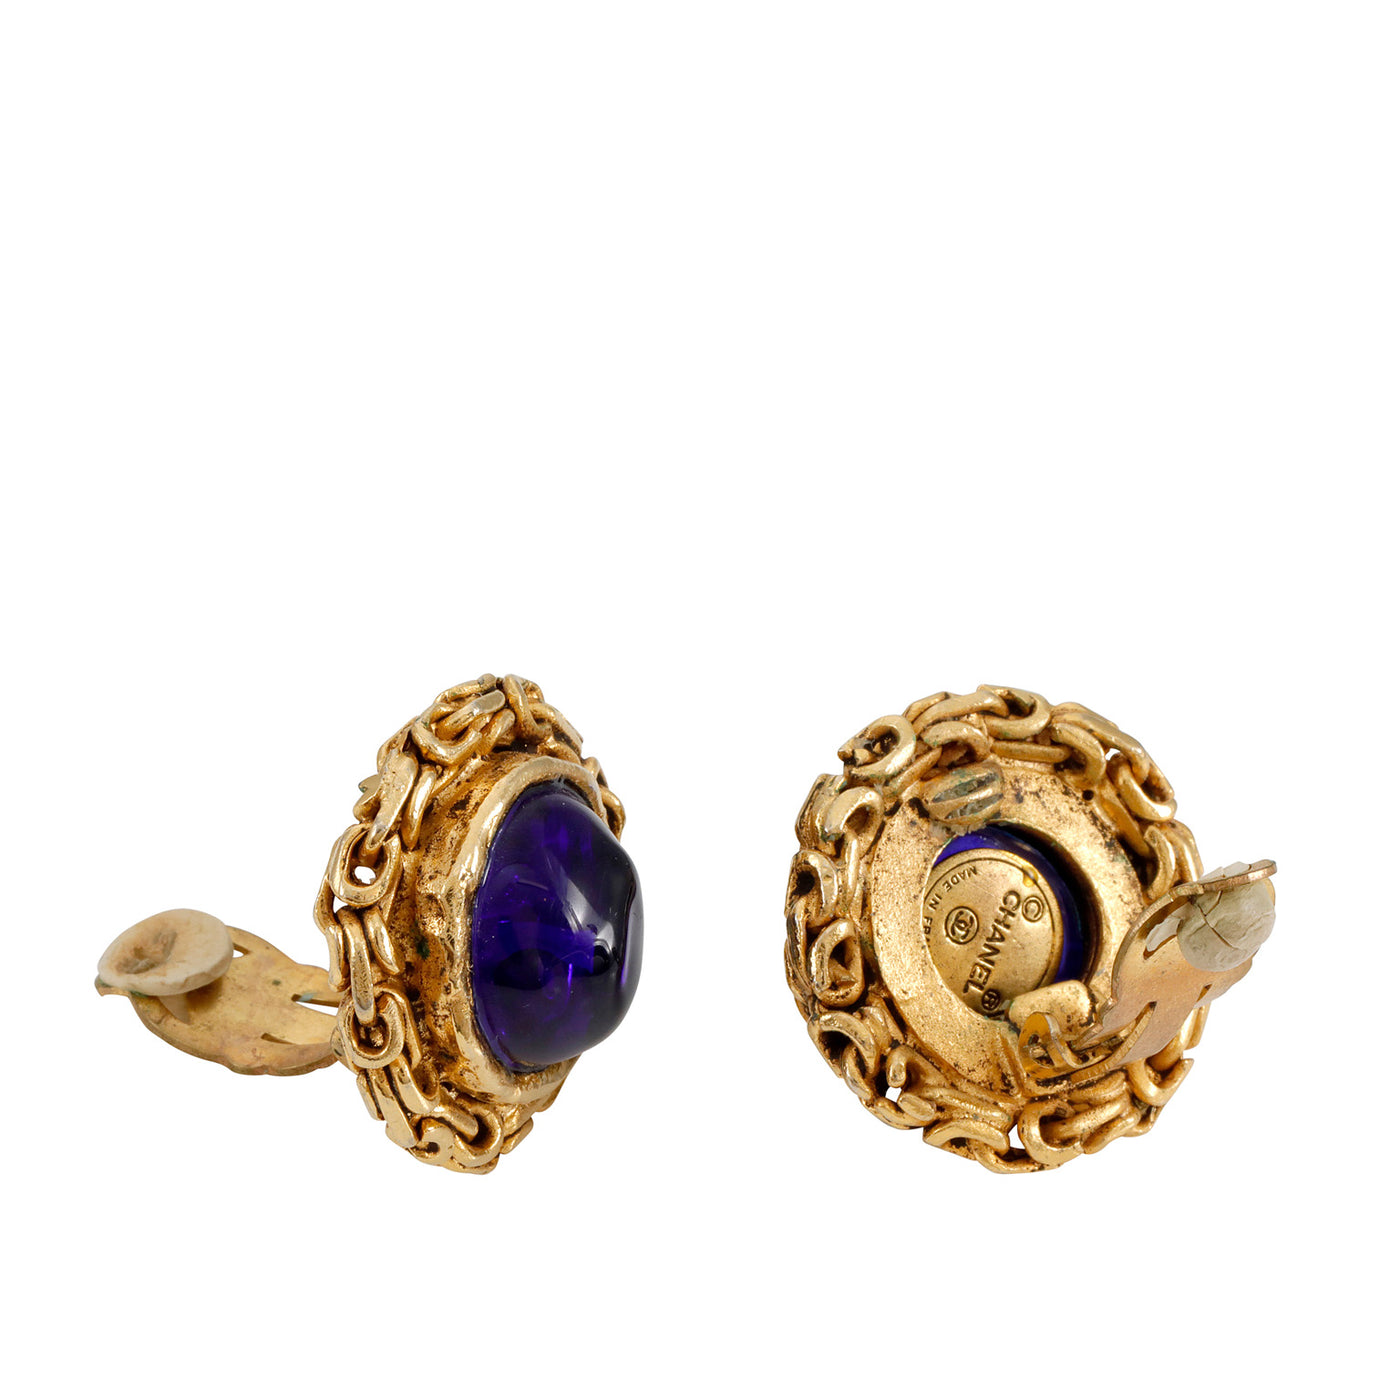 Chanel Vintage Blue Gripoix Earrings with Gold Chain Detail